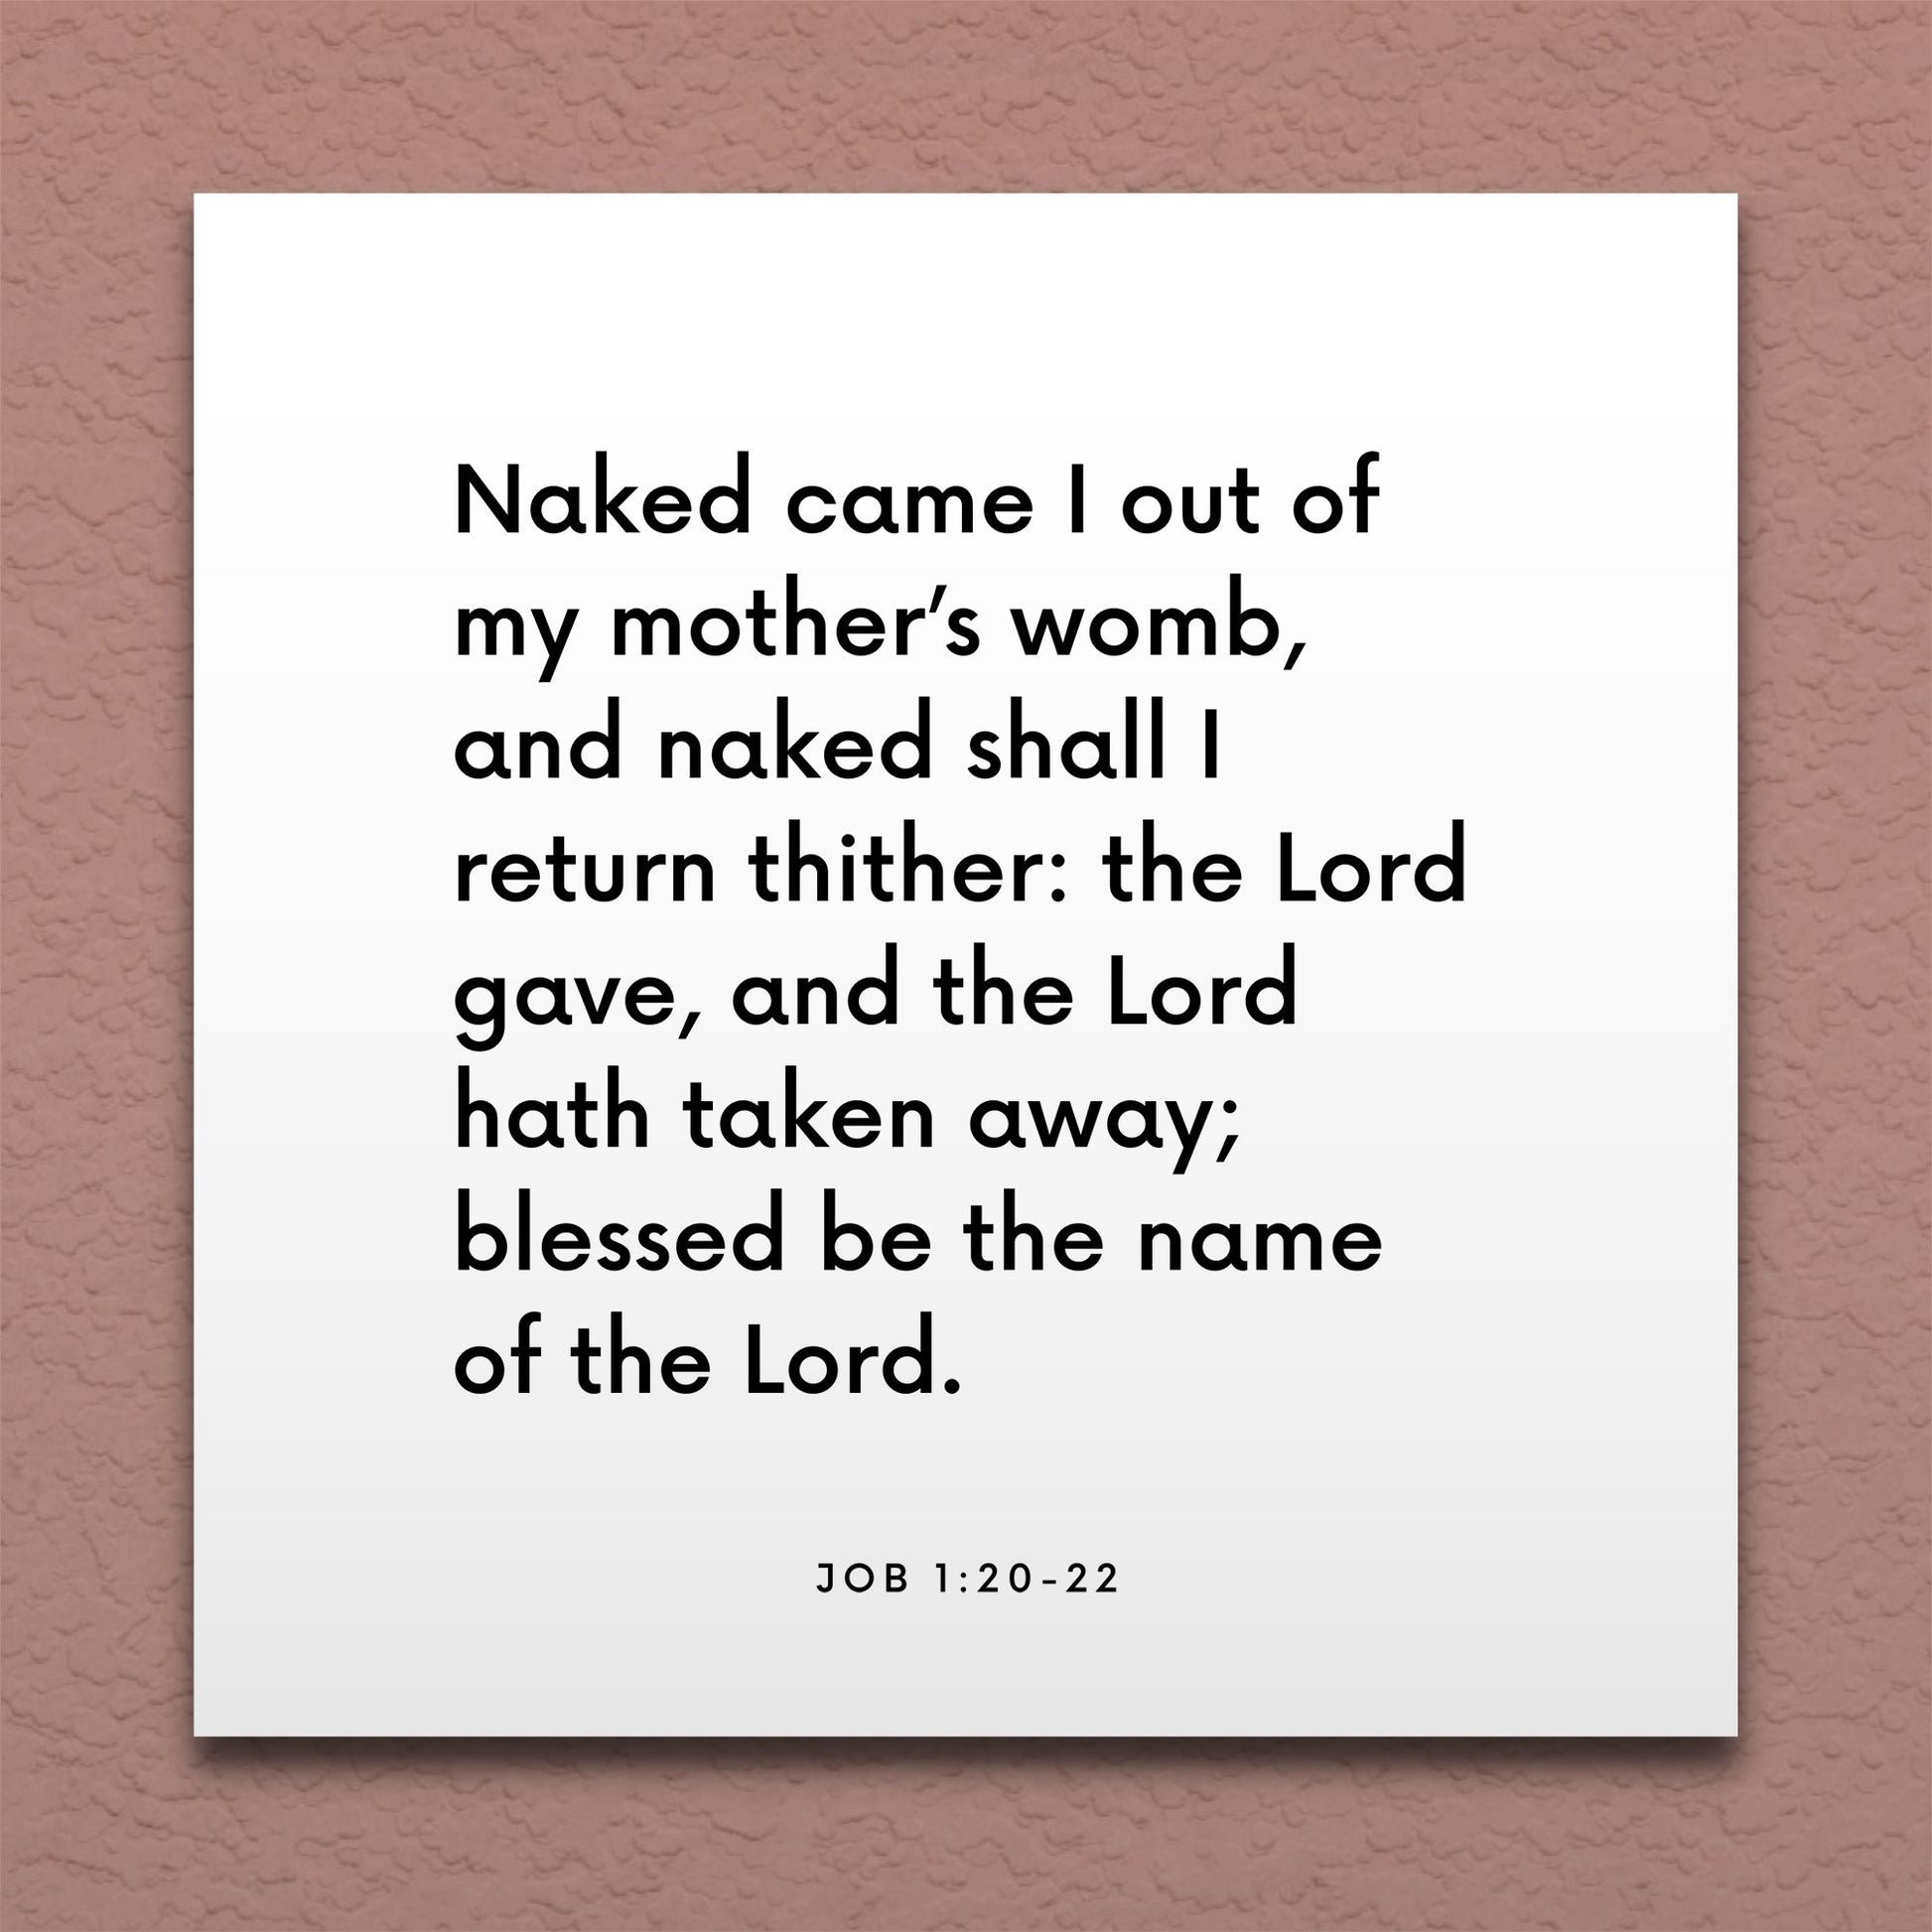 Wall-mounted scripture tile for Job 1:20-22 - "Naked came I out of my mother’s womb, naked shall I return"